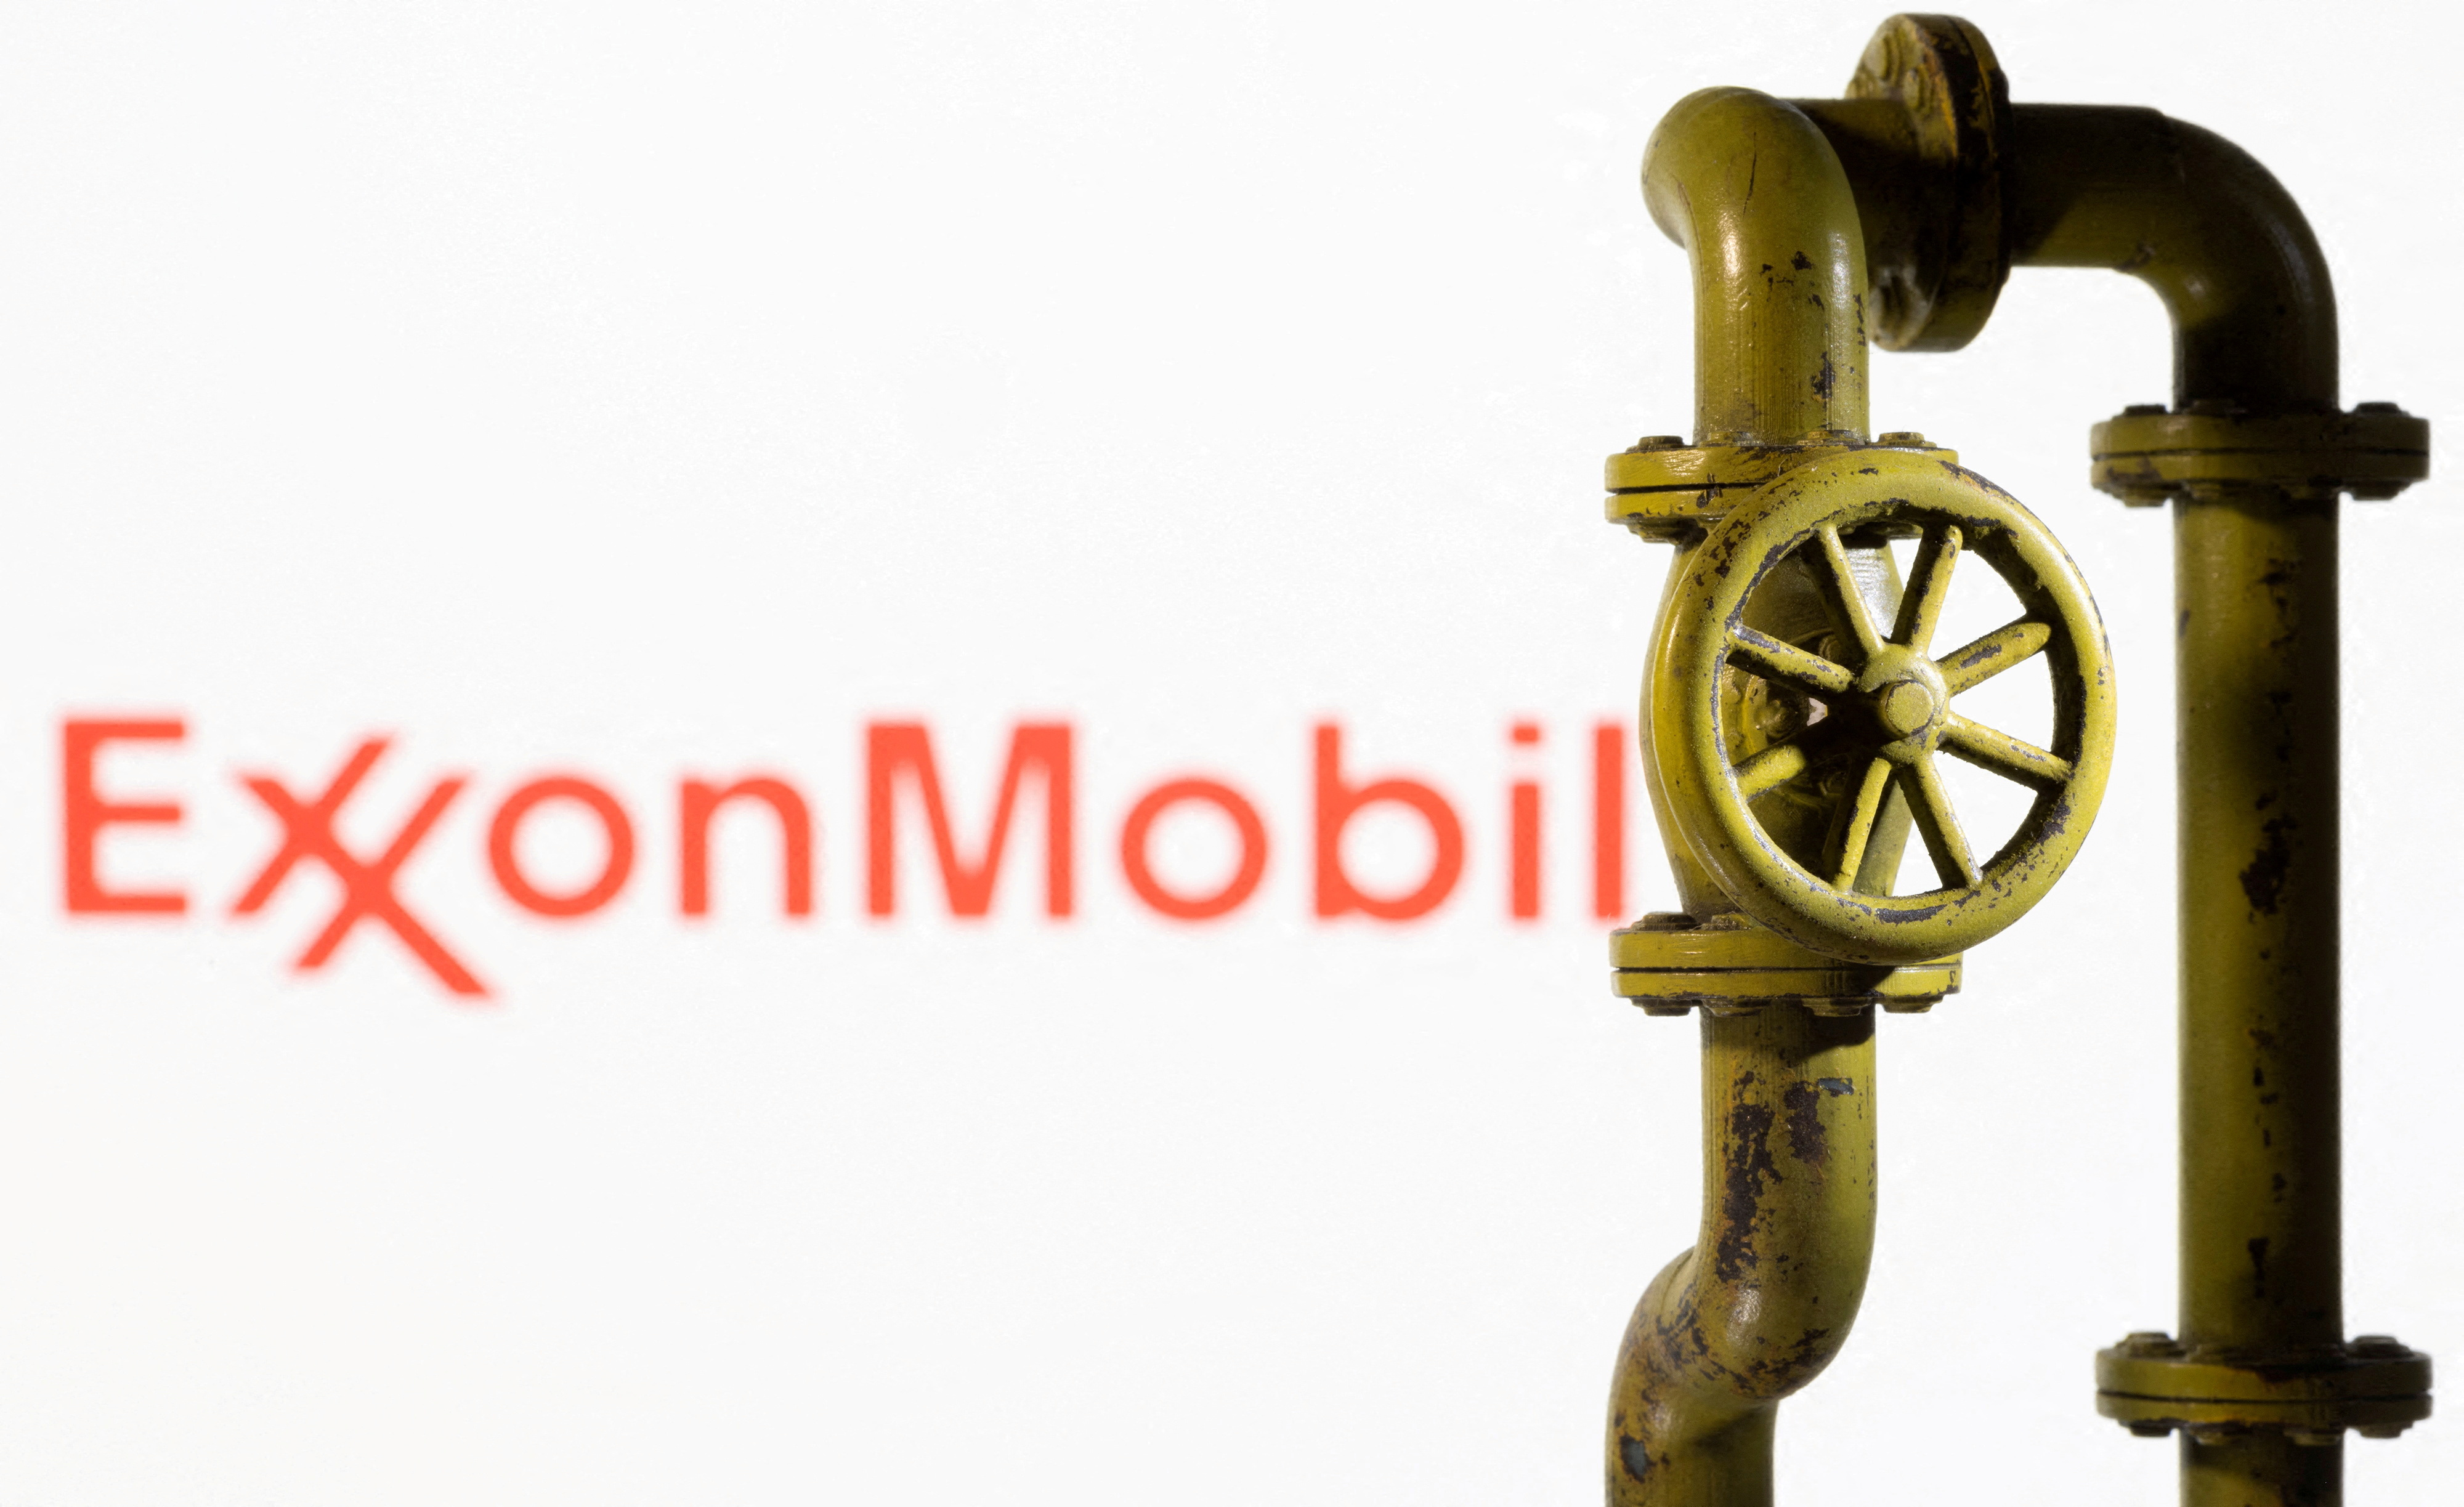 Illustration shows ExxonMobil logo and natural gas pipeline